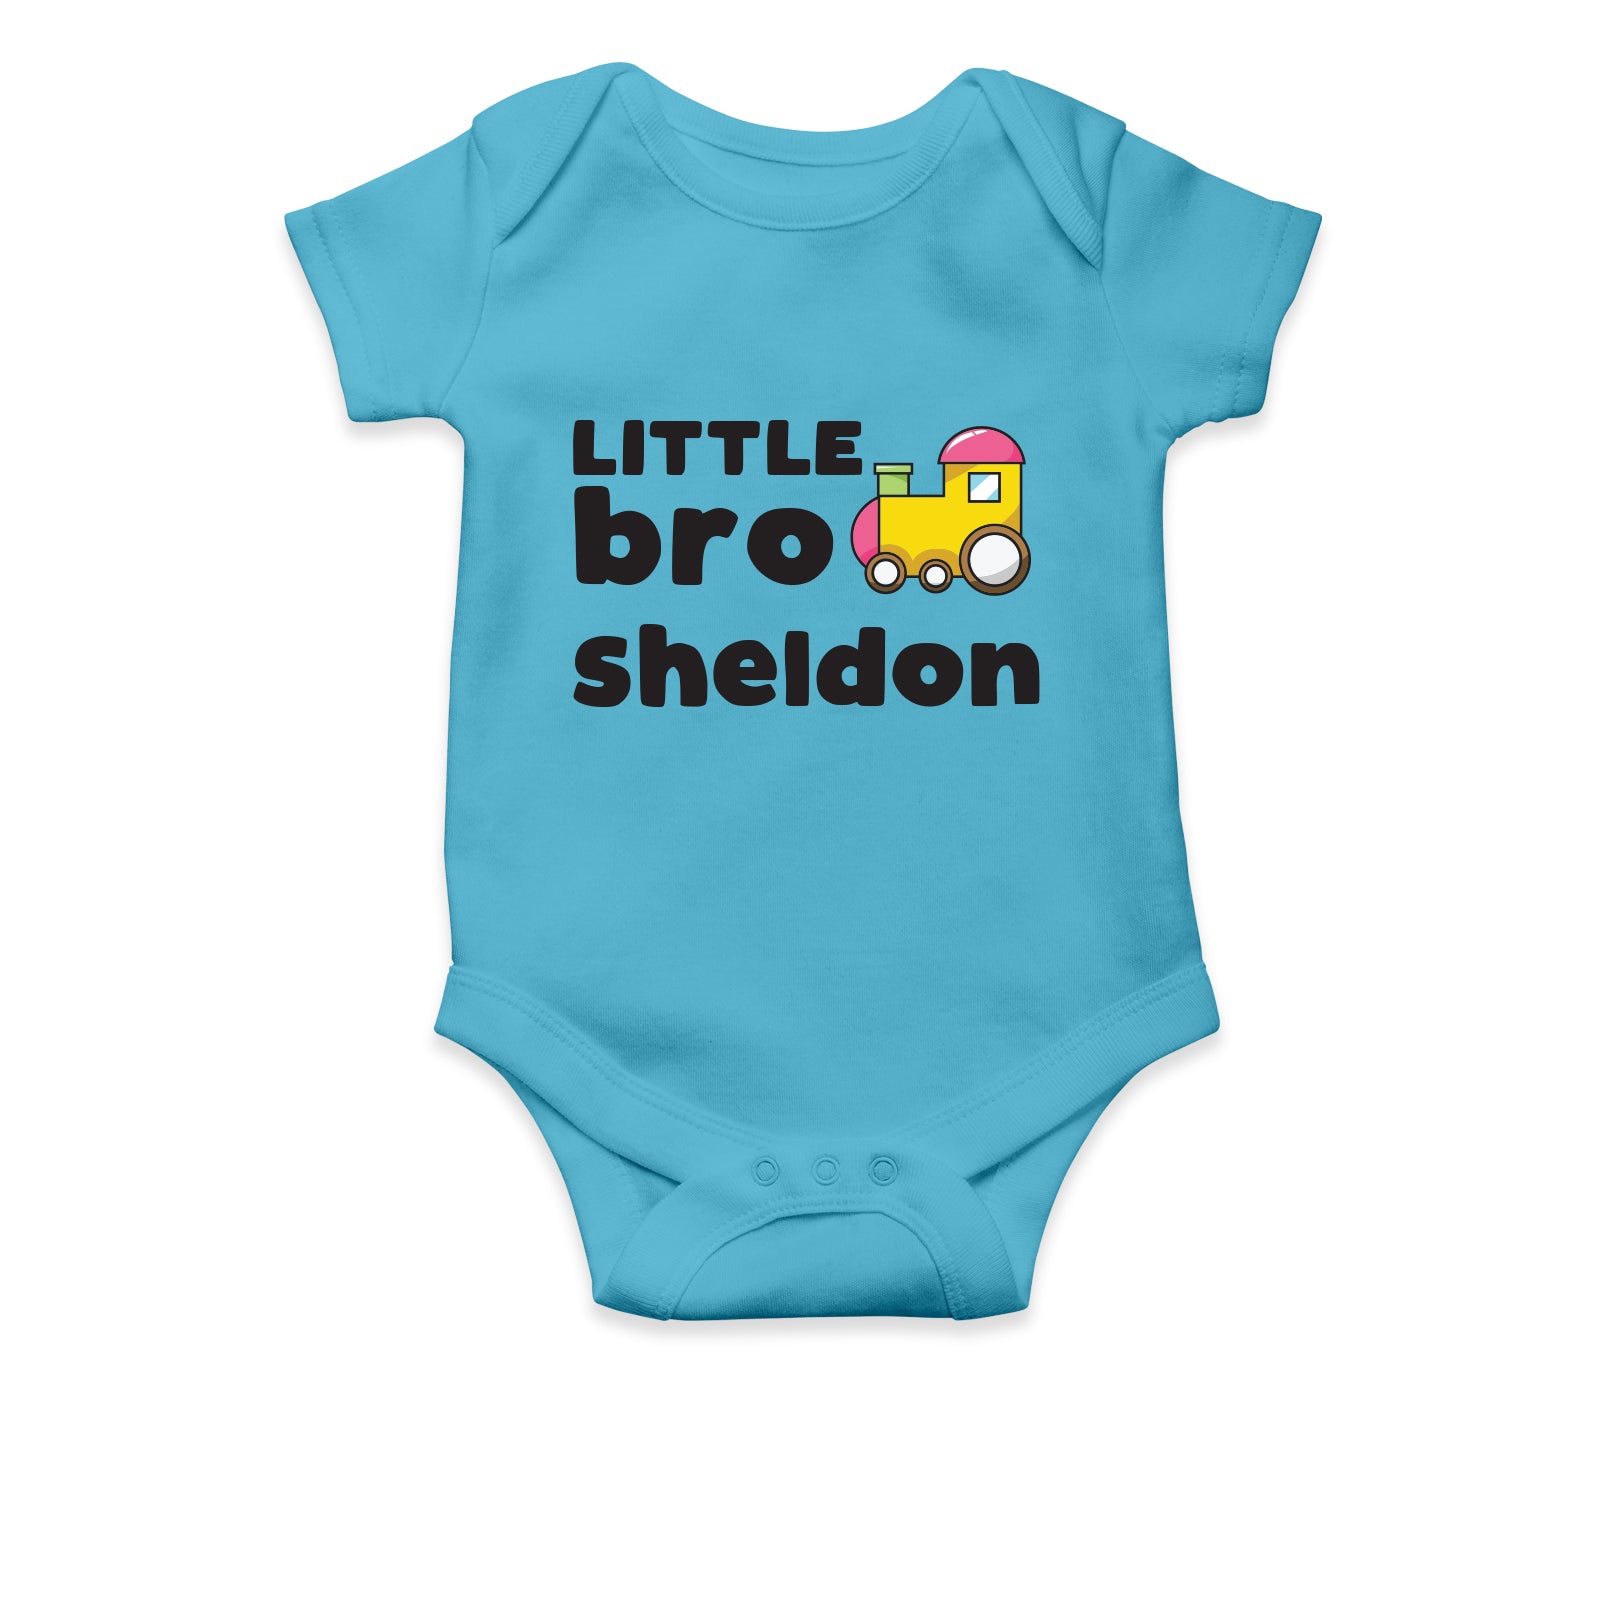 Personalised White Baby Body Suit Grow Vest - Train